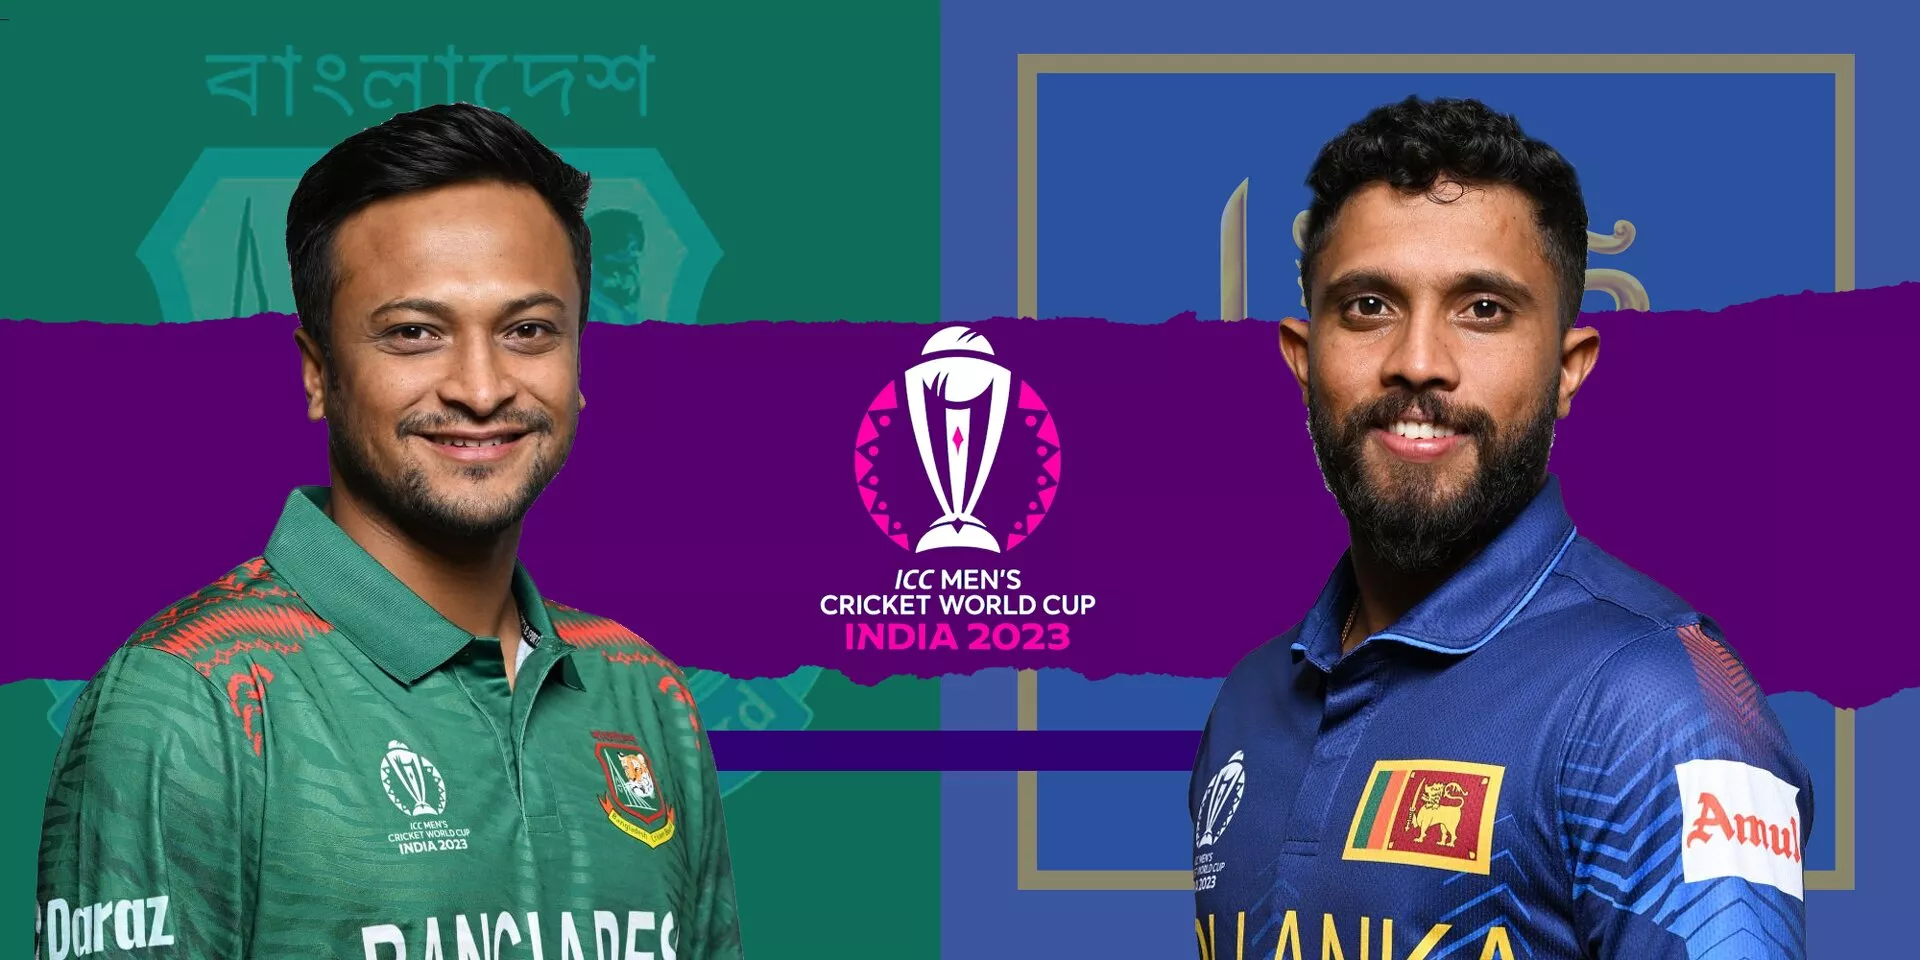 BAN vs SL Live streaming details, when and where to watch ICC Cricket World Cup 2023 match 38